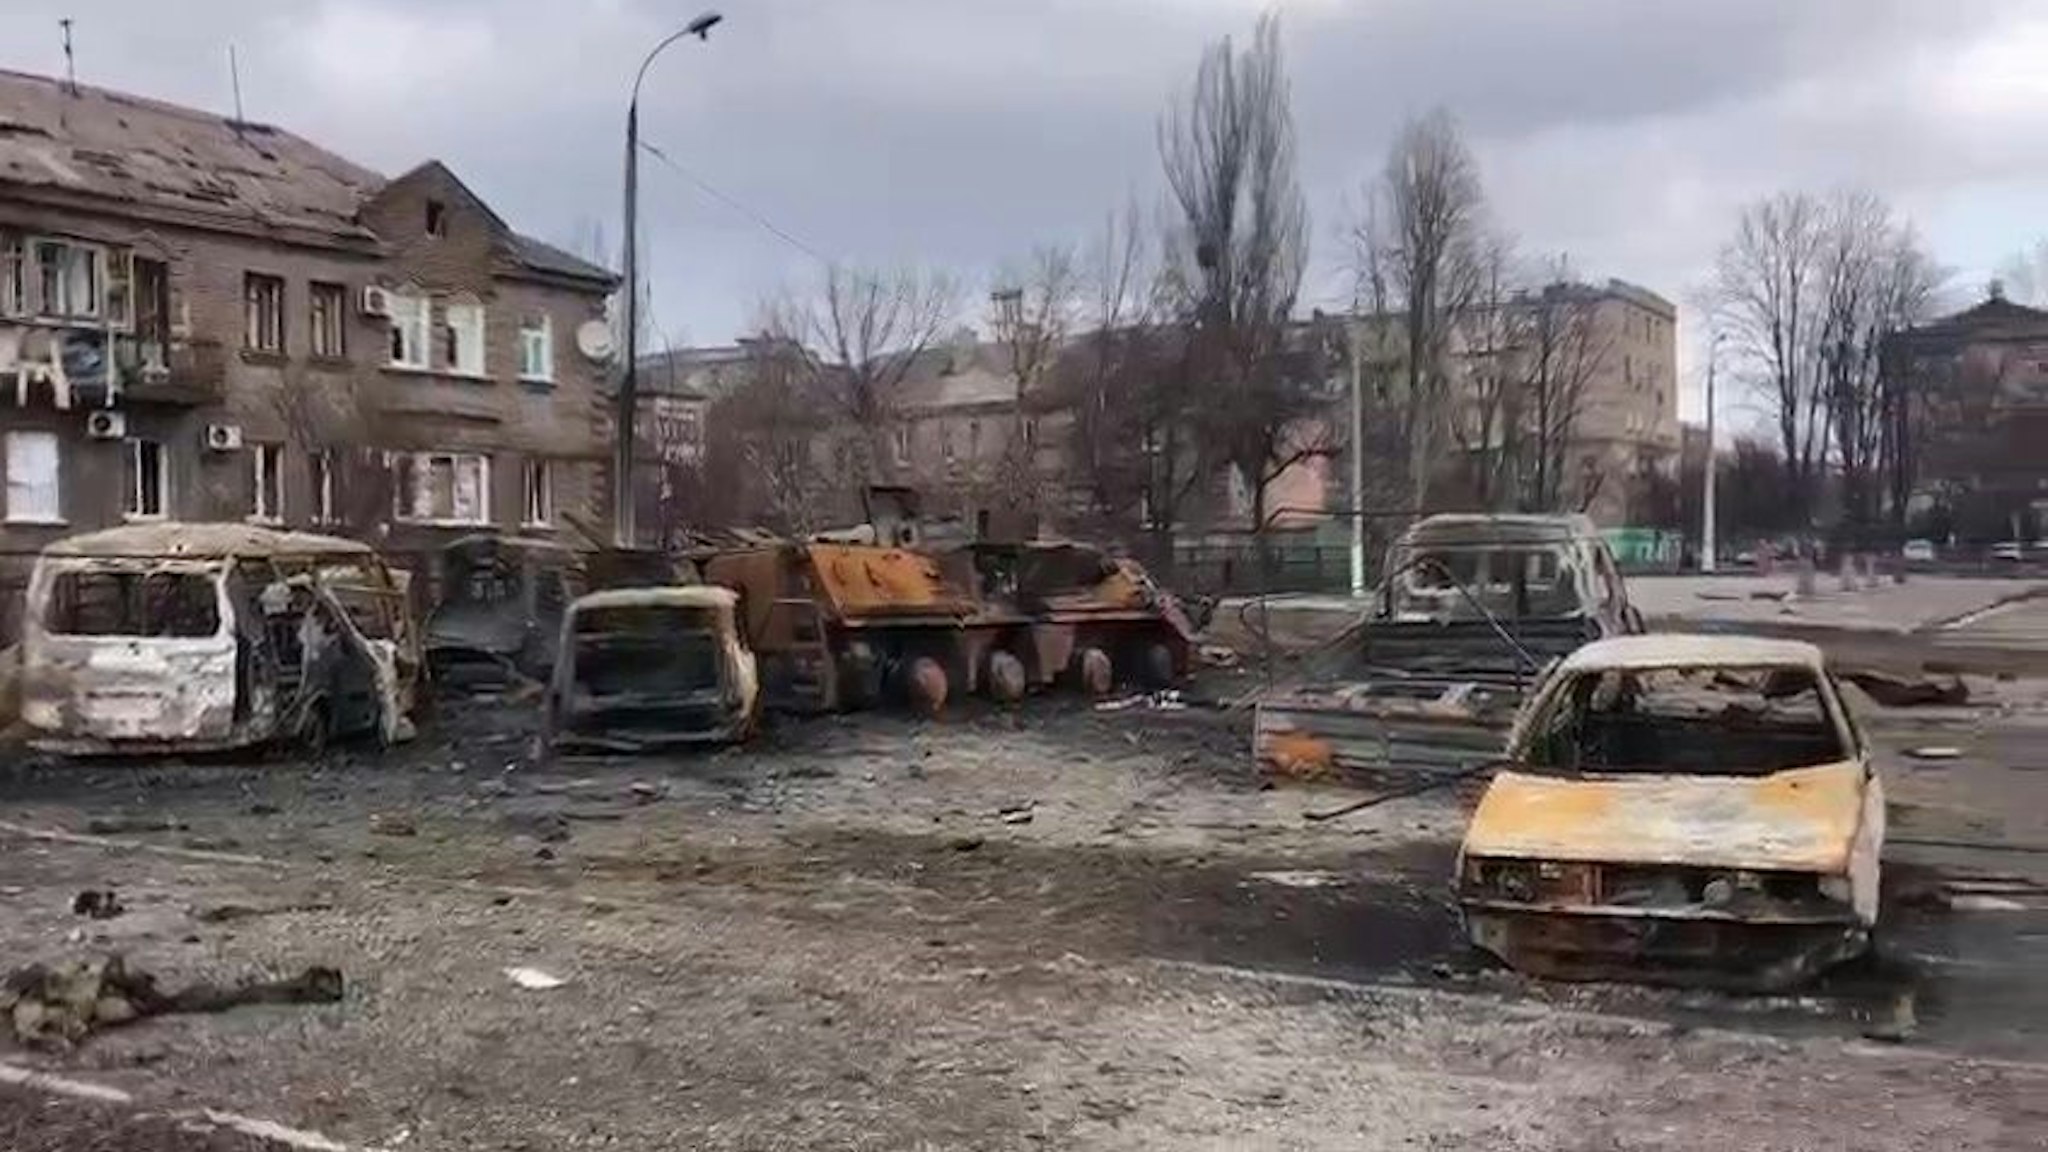 MARIUPOL, UKRAINE - MARCH 21: A screen grab captured from a video shows destroyed buildings and vehicles after Russian attacks in Mariupol, Ukraine on March 21, 2022. (Photo by AA/Anadolu Agency via Getty Images)